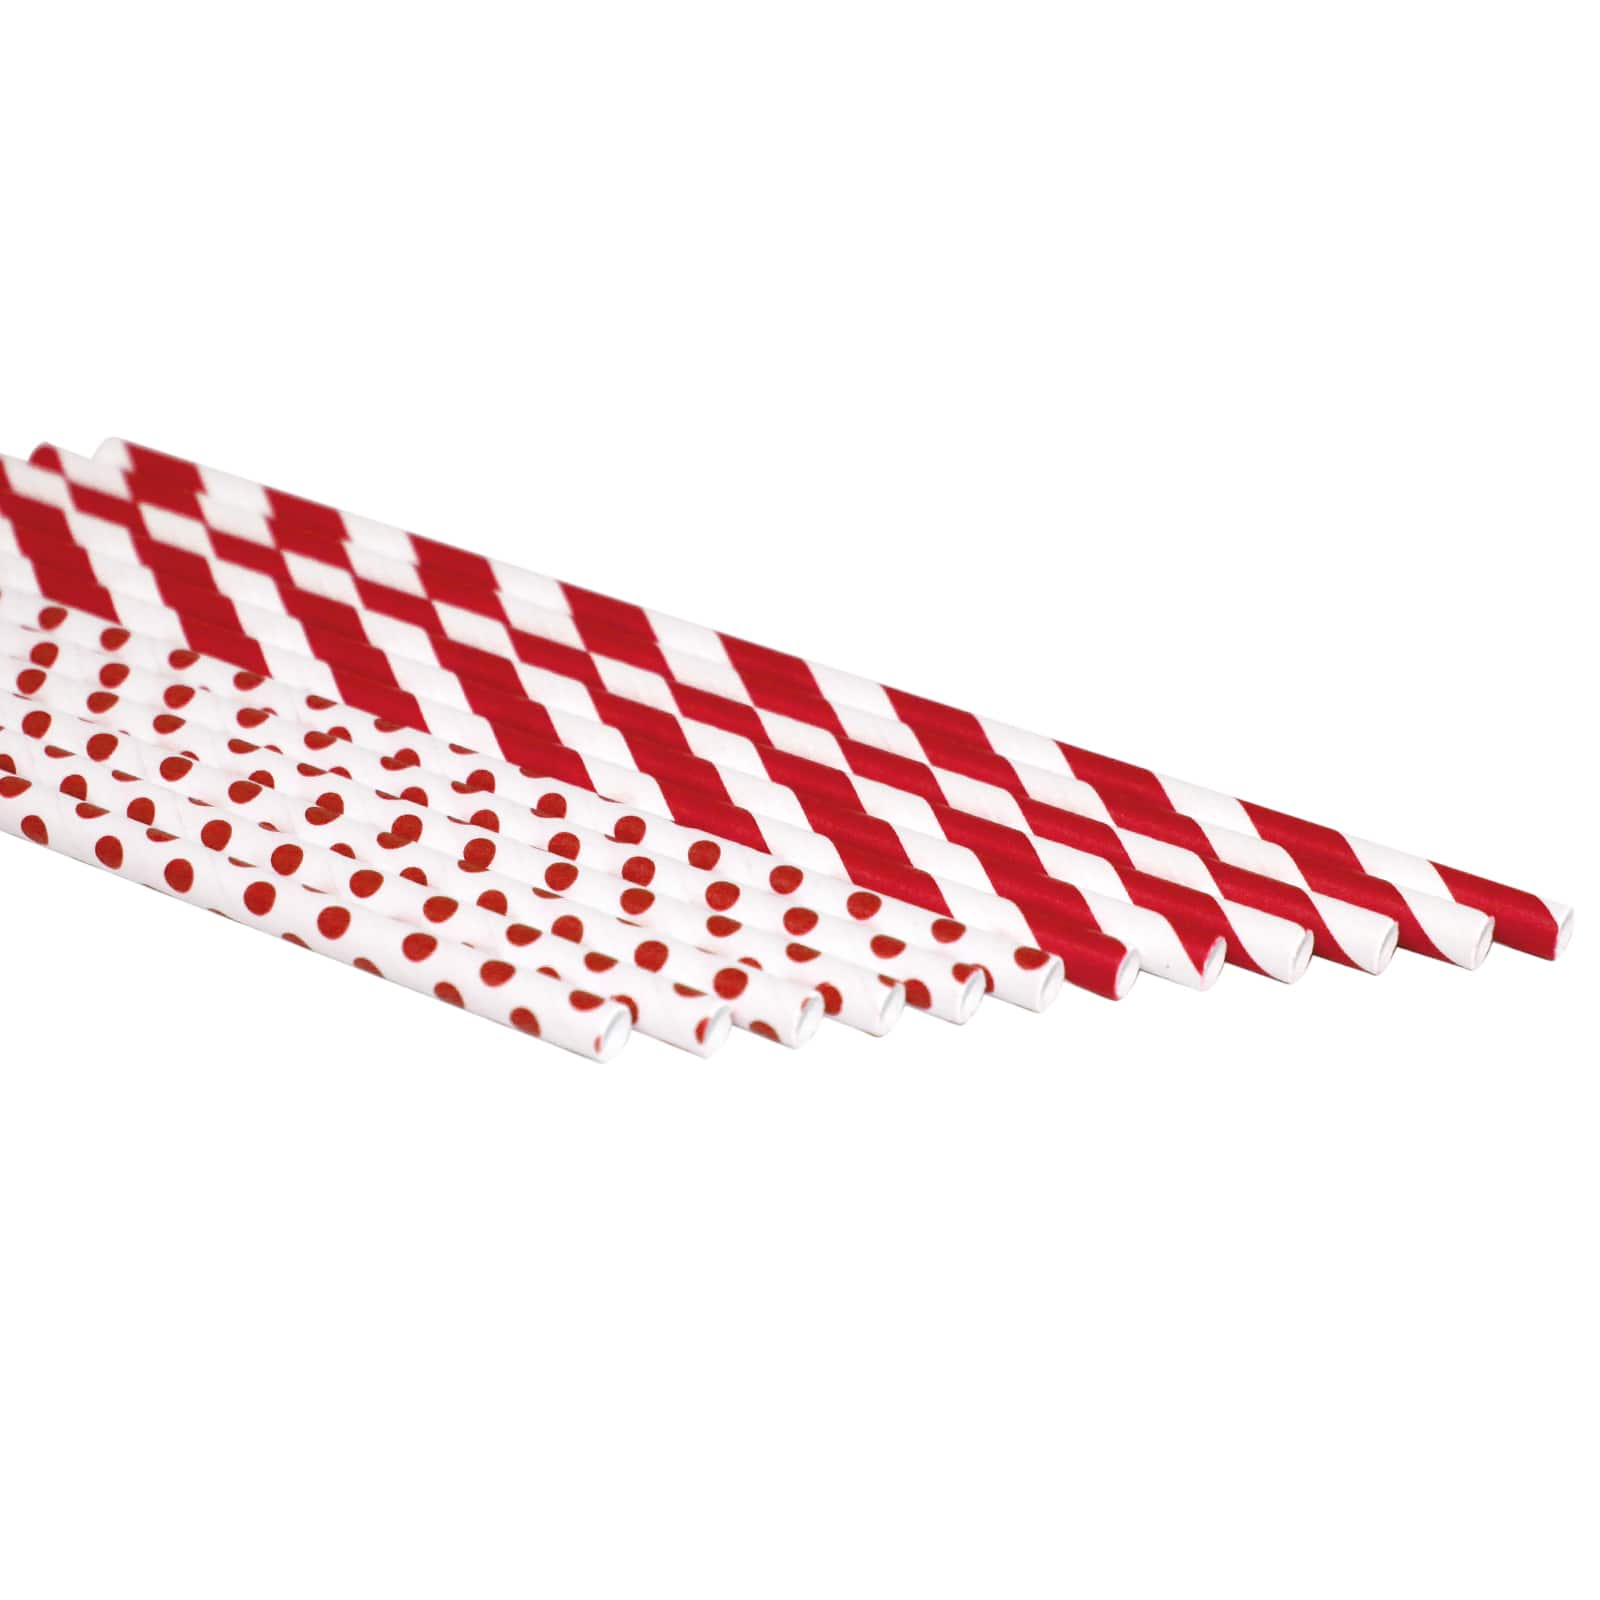 Printed Paper Straws by Celebrate It&#x2122; Entertaining, 100ct.